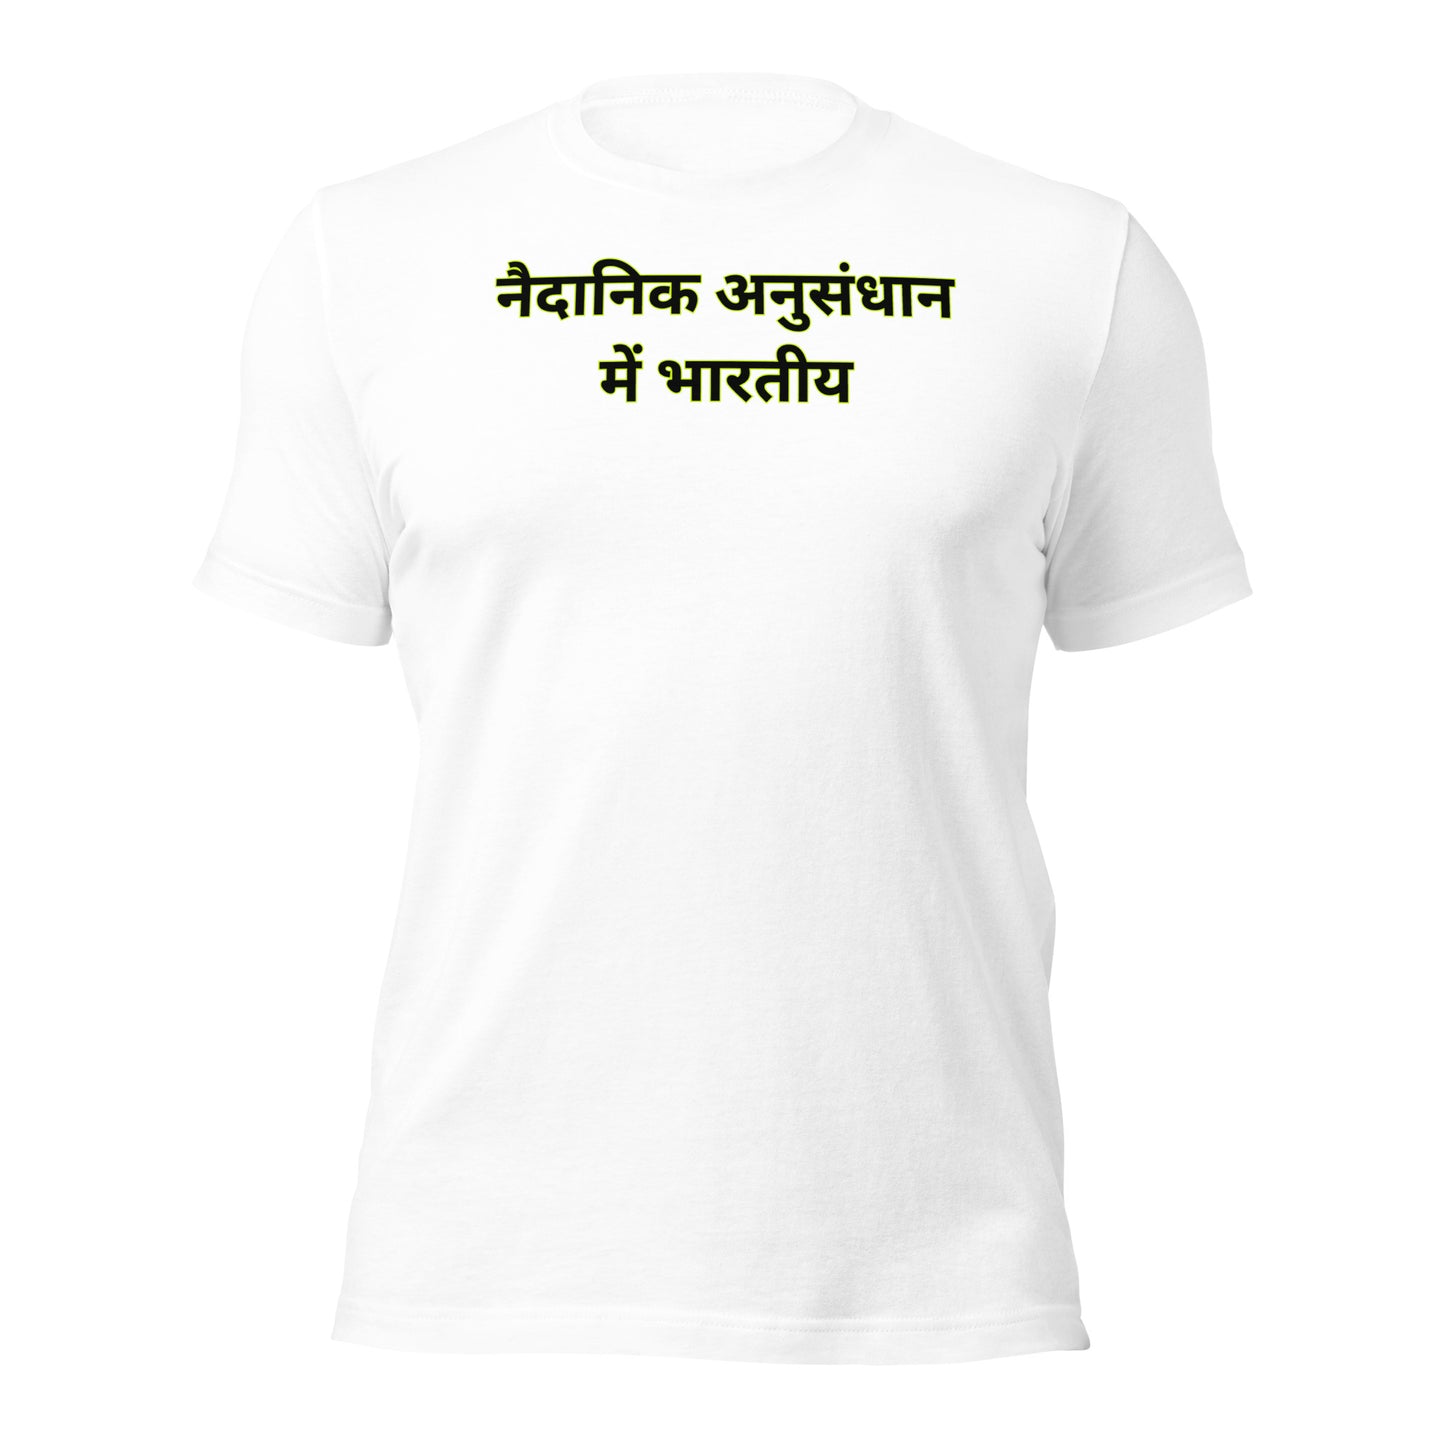 INDIANS in Clinical Research (Hindi) Unisex t-shirt